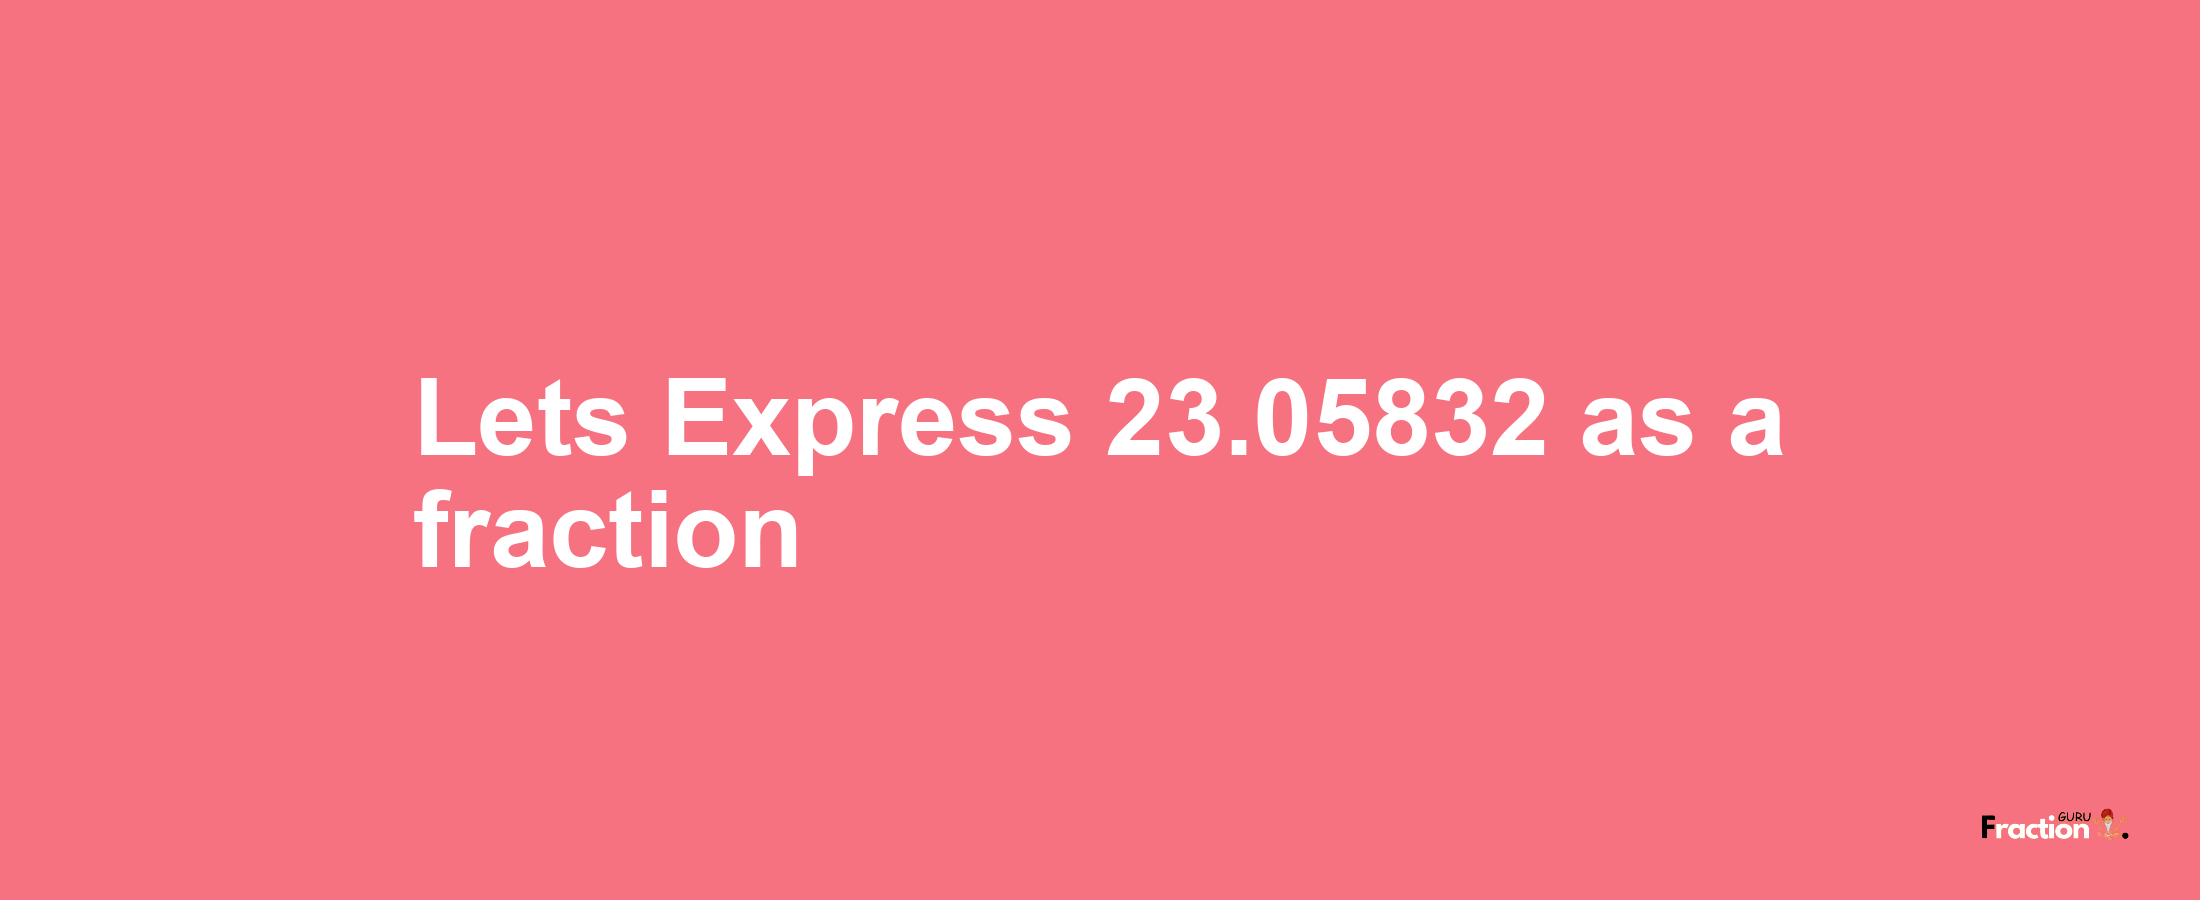 Lets Express 23.05832 as afraction